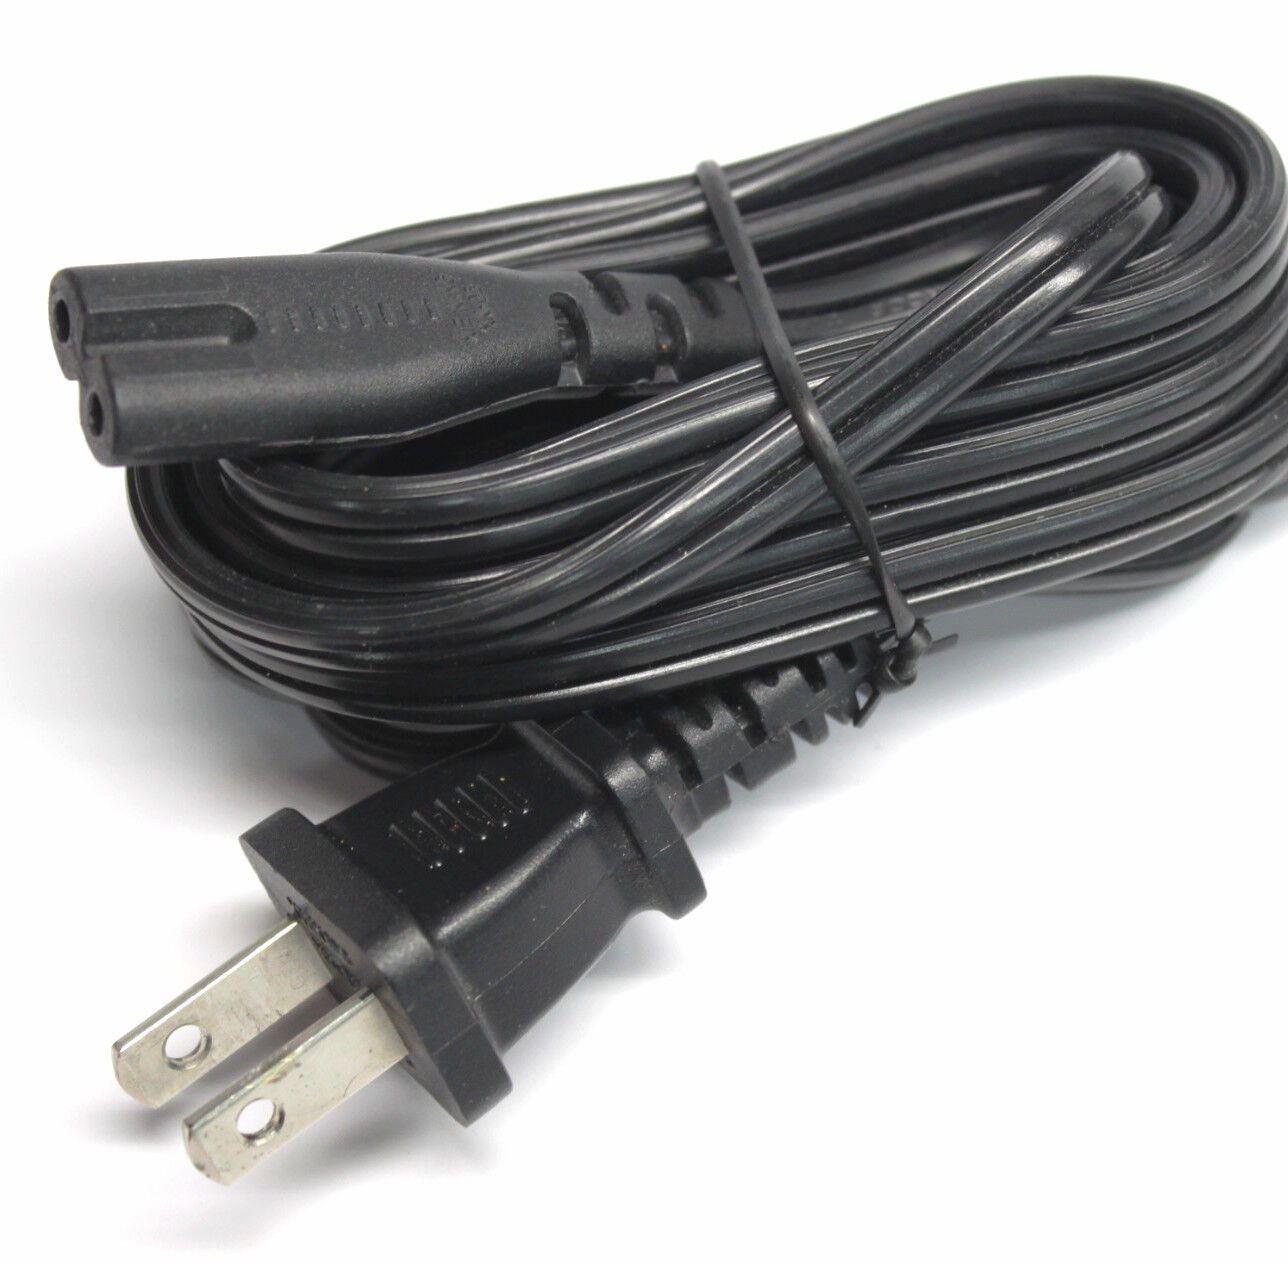 Power Cable Non-Polarized Cord Replacement for Philips Respironics DreamStation